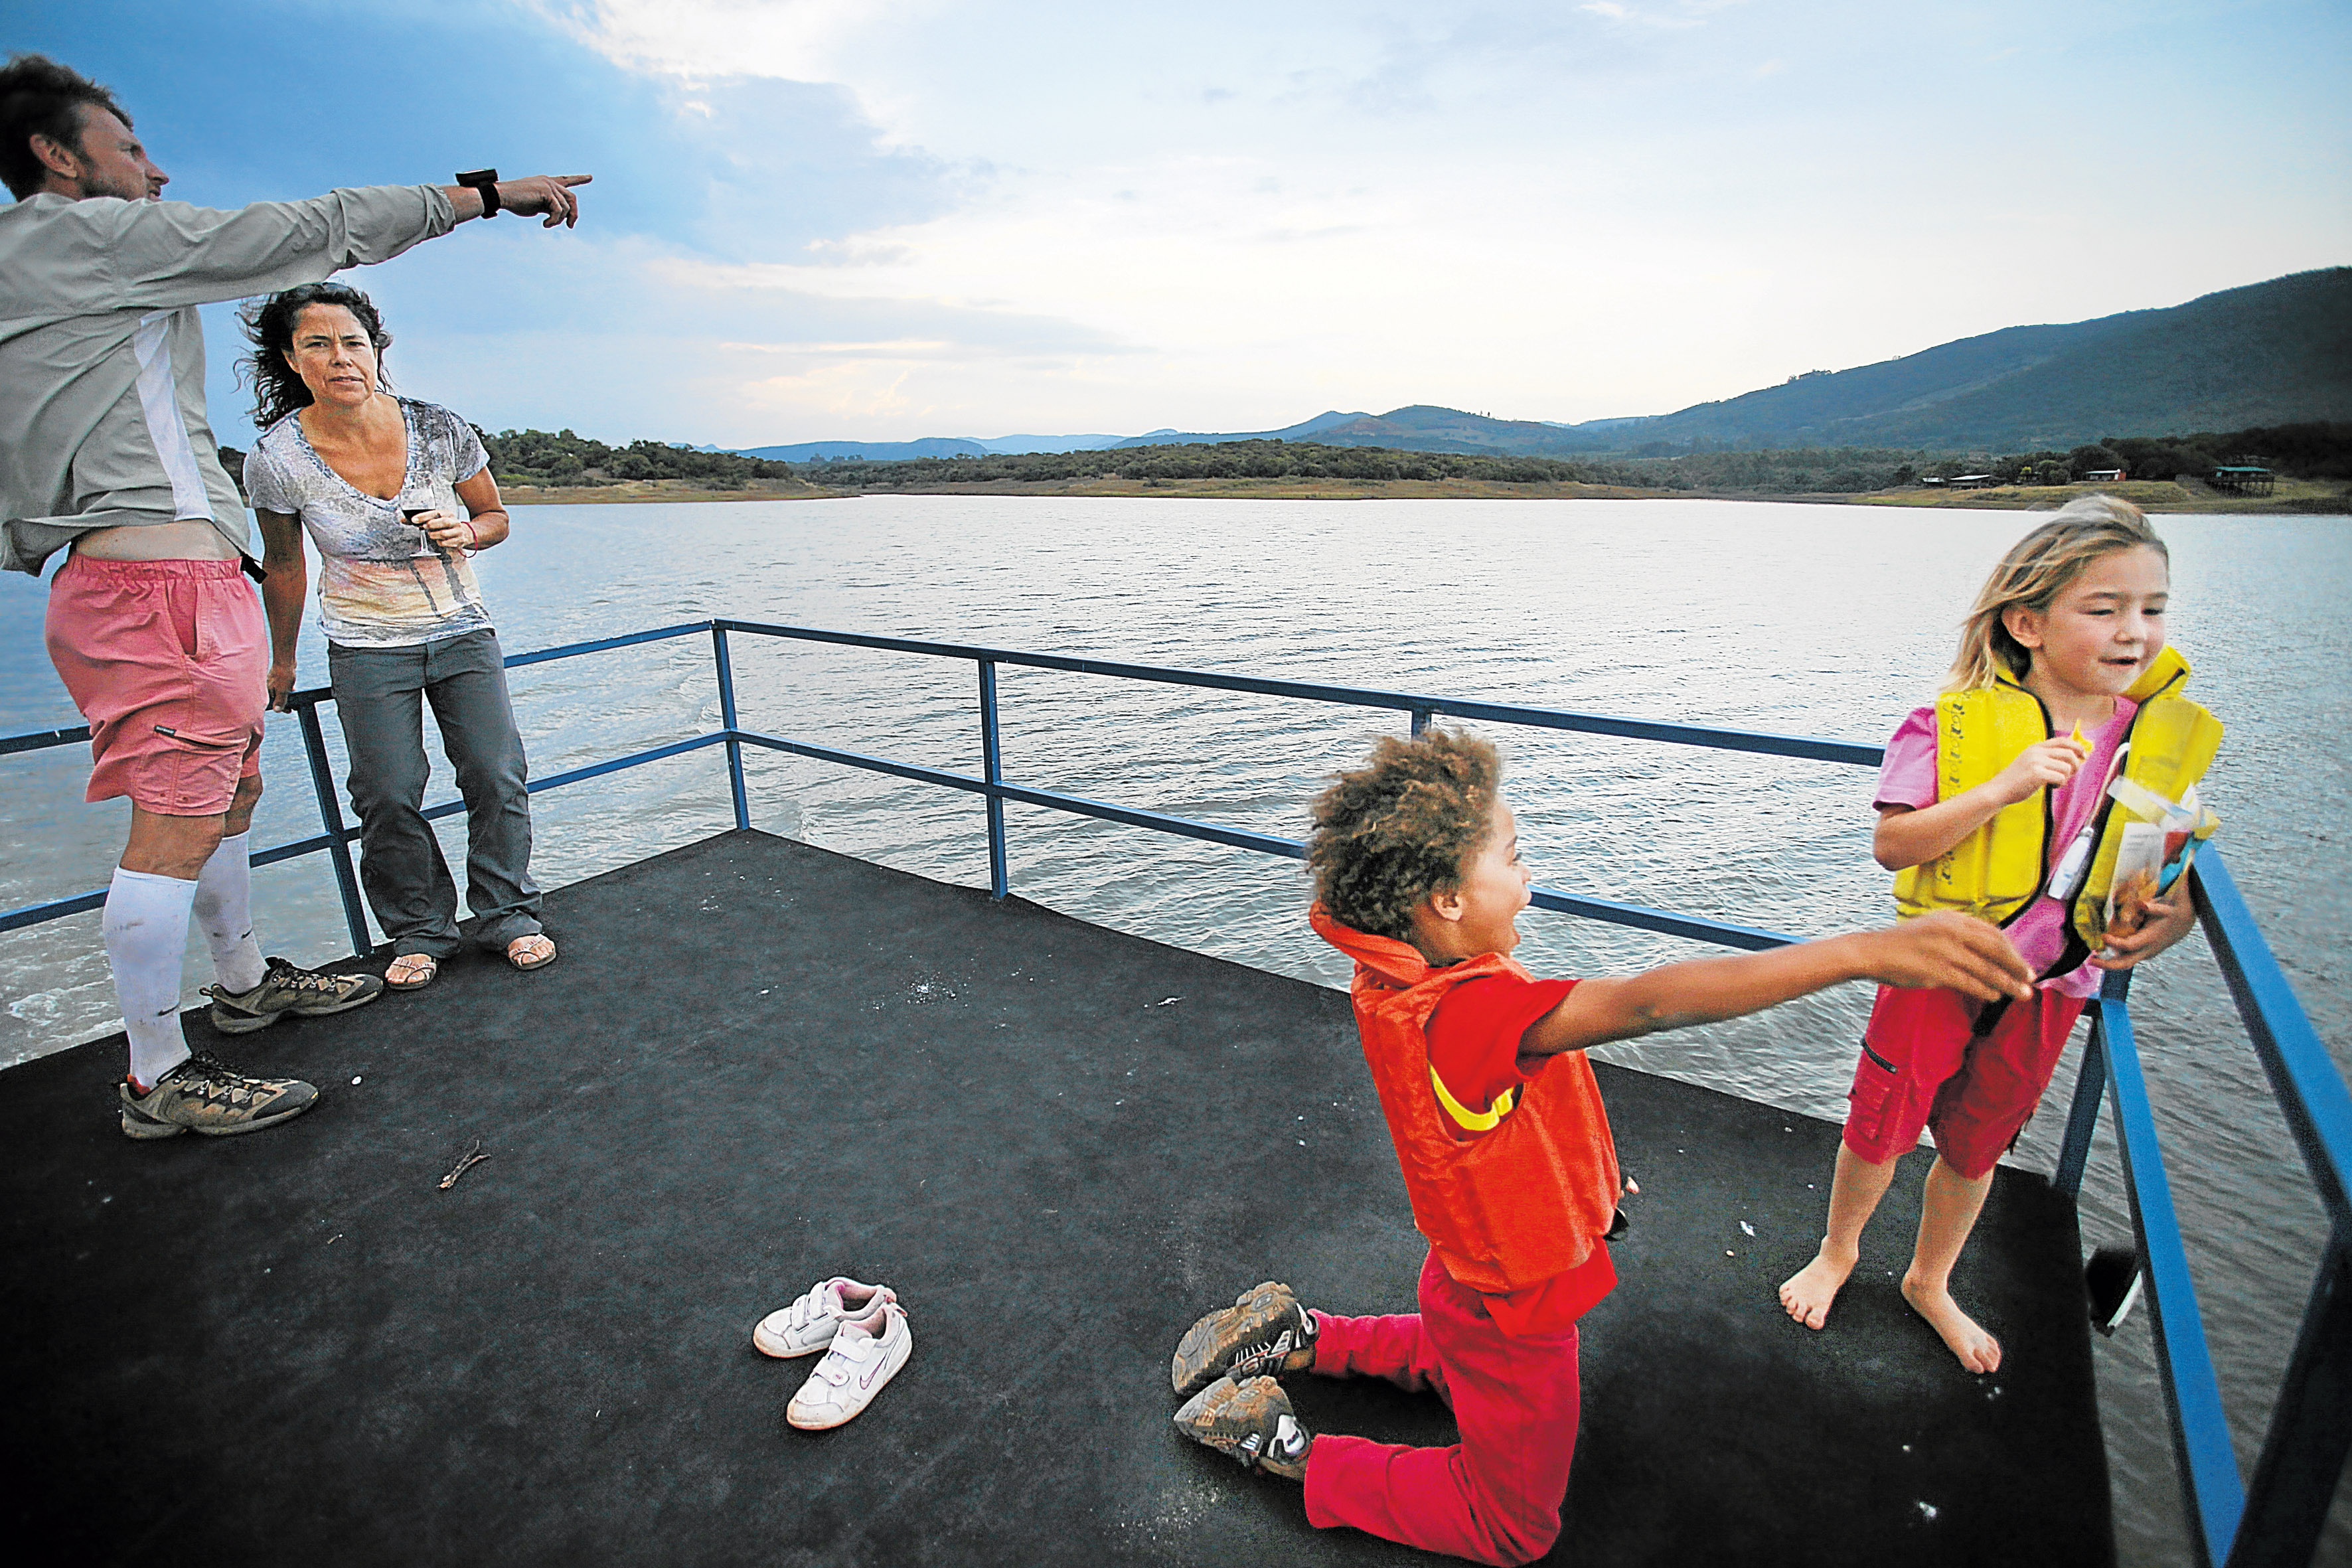 LIMPOPO, SOUTH AFRICA - JUNE 17: A man and woman with their children take a boat ride on the Albasini dam on June 17, 2012 in Limpopo, South Africa. Feature text available. (Photo by Gallo Images / Sunday Times / Marianne Schwankhart) *** Local Caption ***